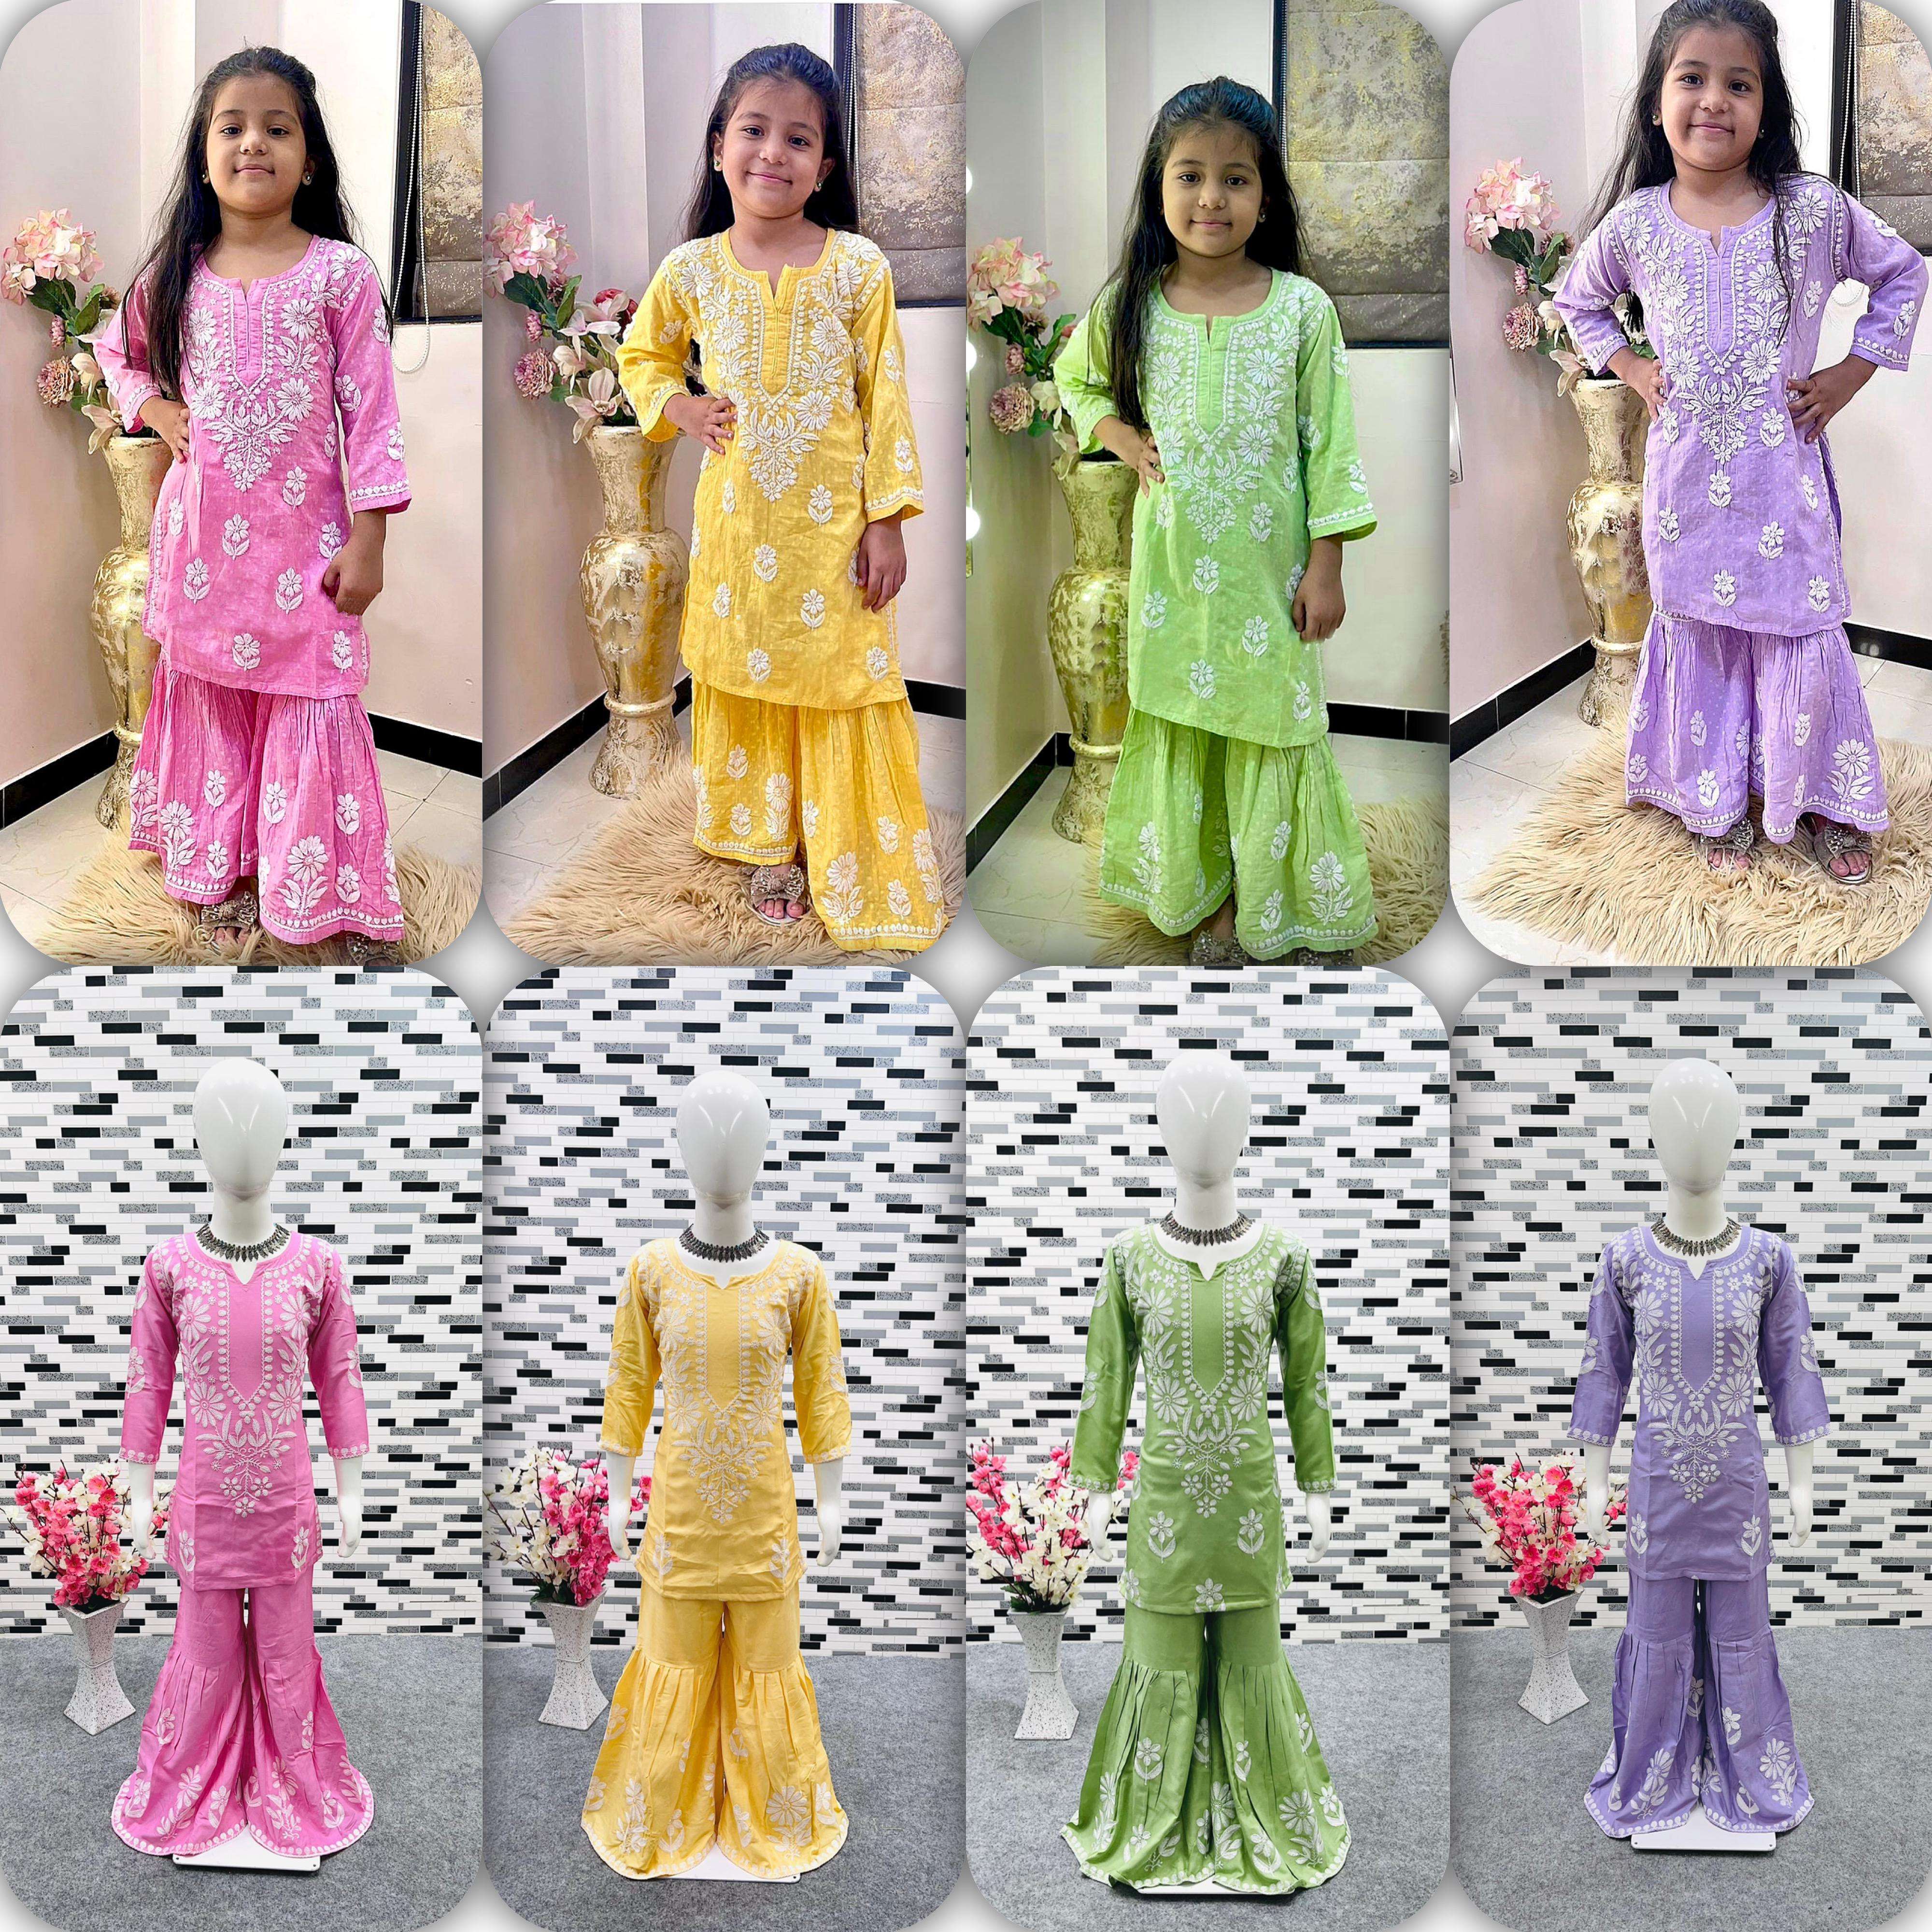 Buy 15 years girls dresses under 500 in India @ Limeroad